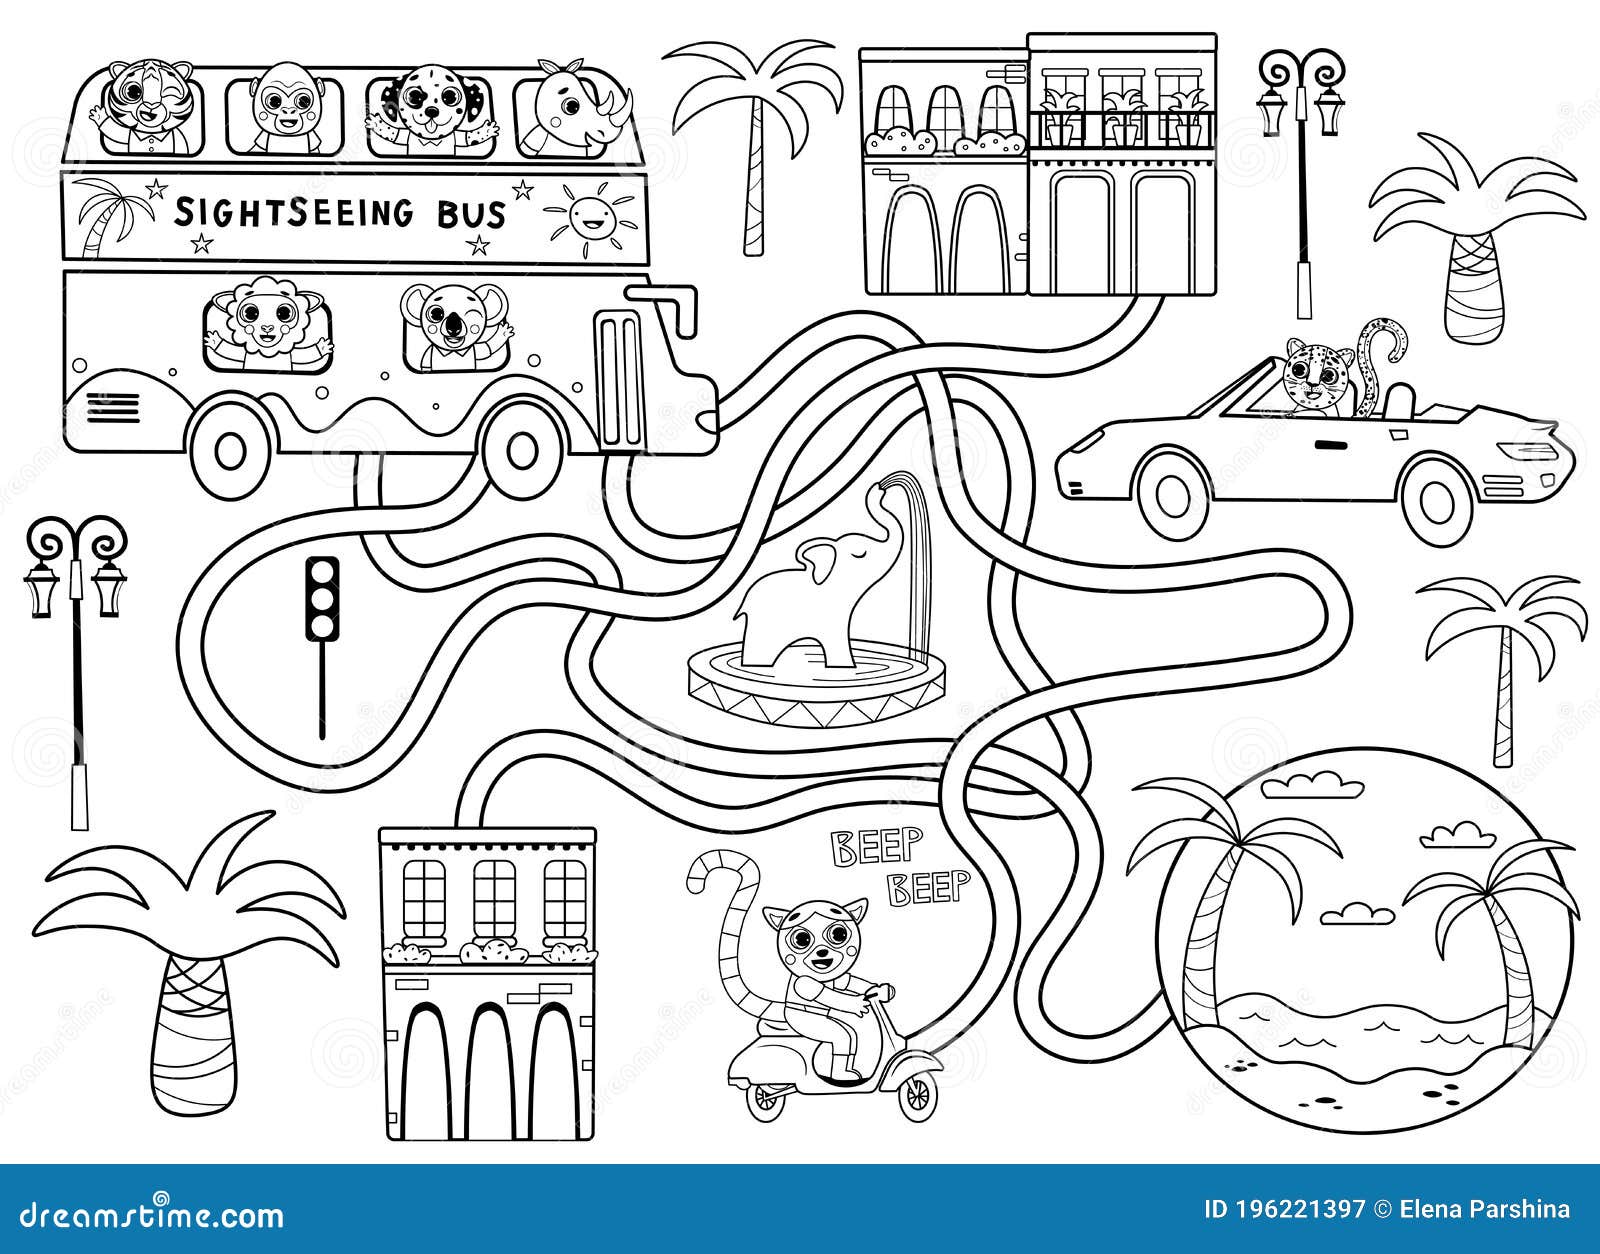 Help the Sightseeing Bus Find the Right Path To the Beach. Color Maze ...